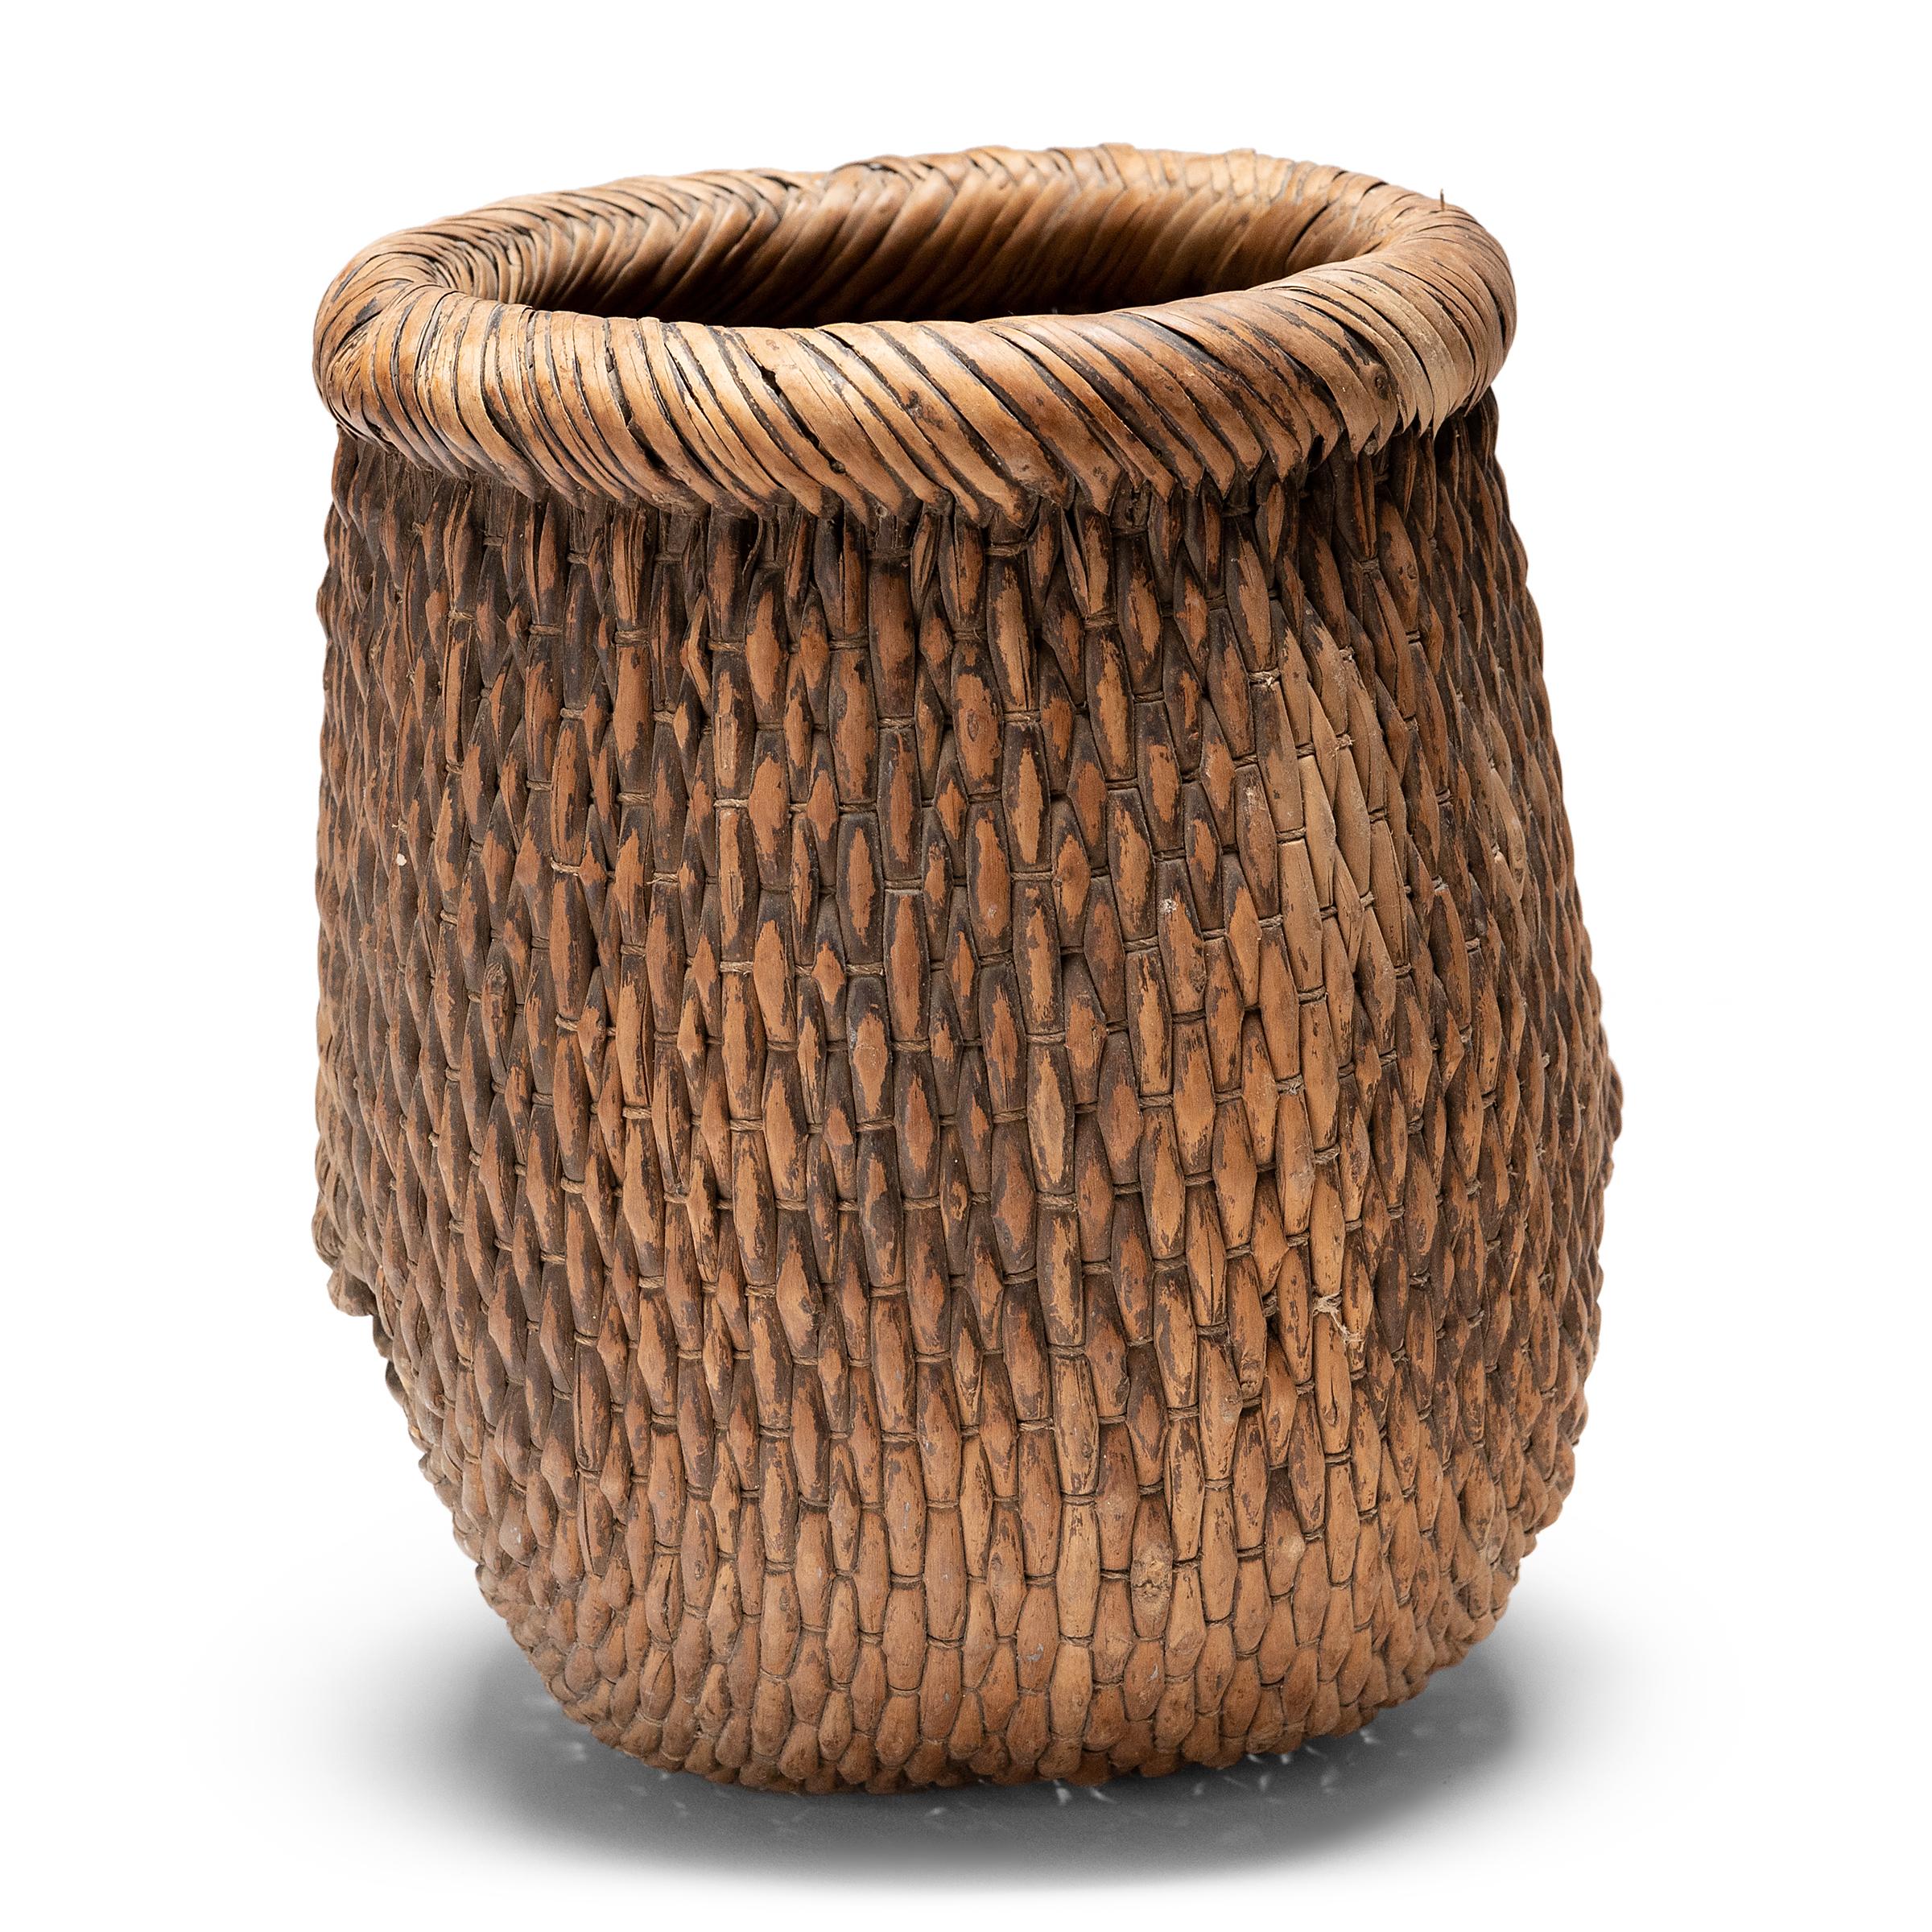 Basket making is an ancient and humble craft, but in the hands of a skilled weaver a simple willow basket can become a truly beautiful work of art. This basket was made in China long ago, and the artisan’s mastery is evident, having been passed down